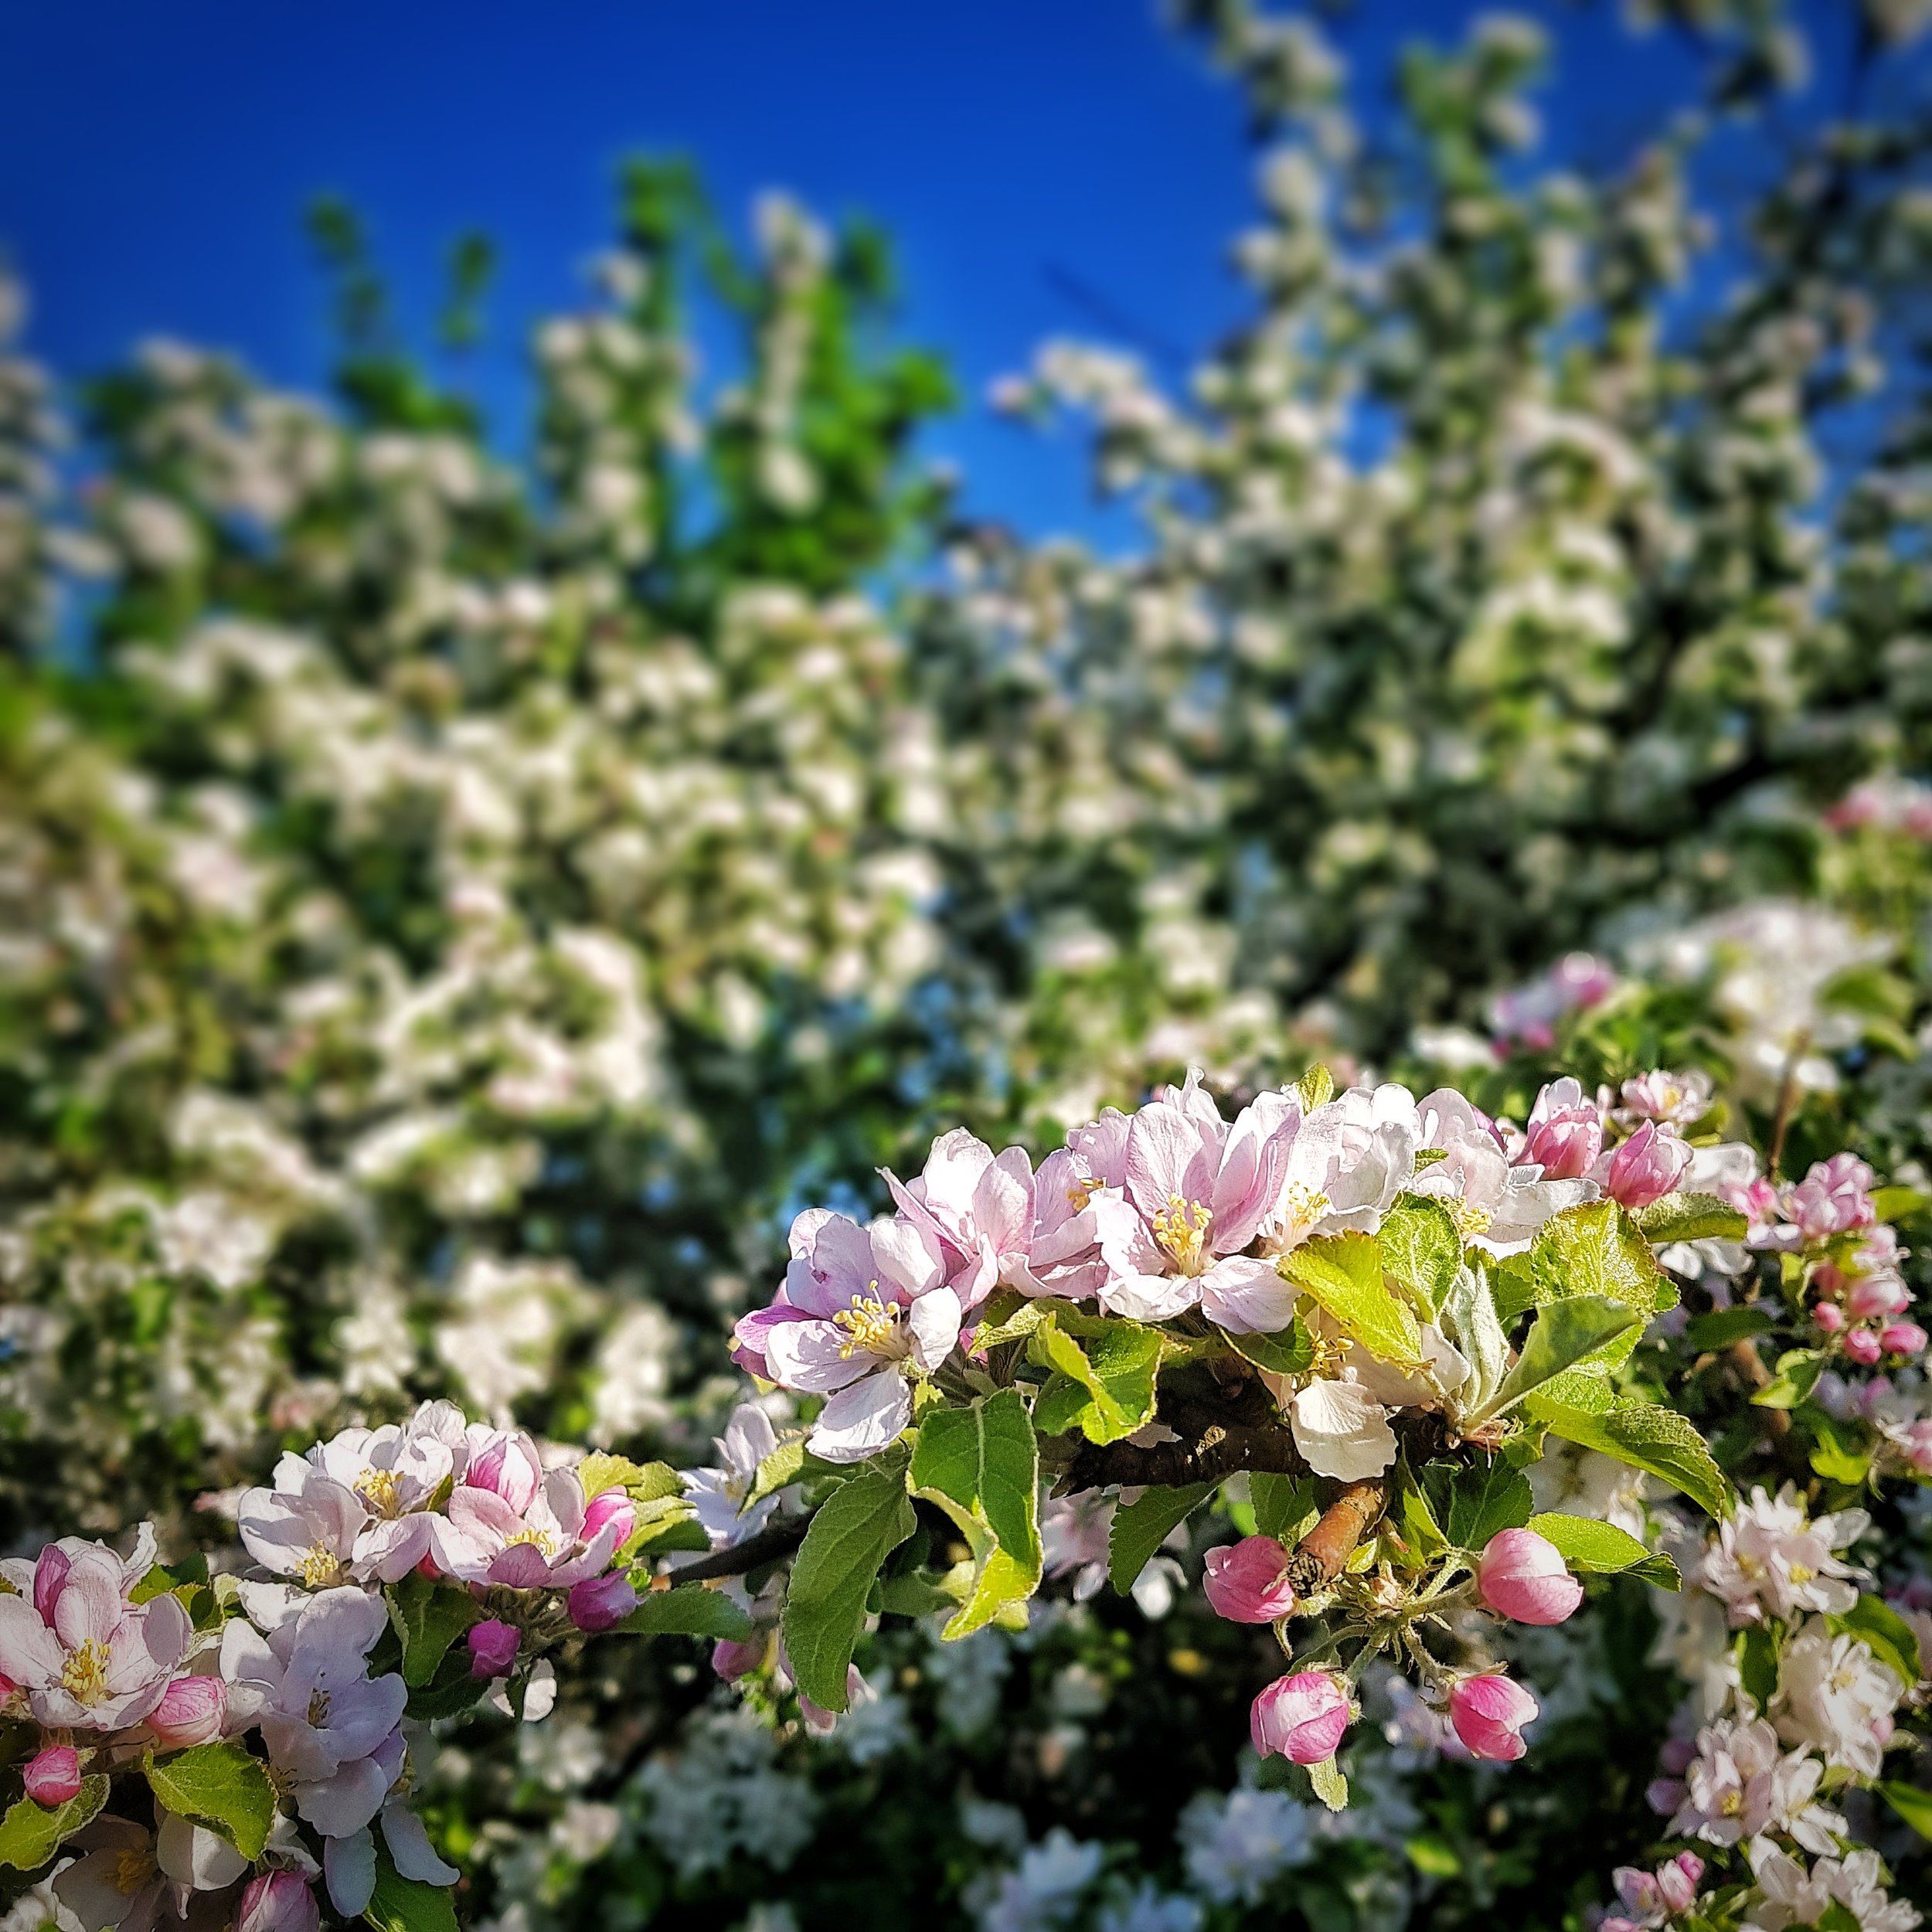 Day 140 - May 20: Apple Blossoms